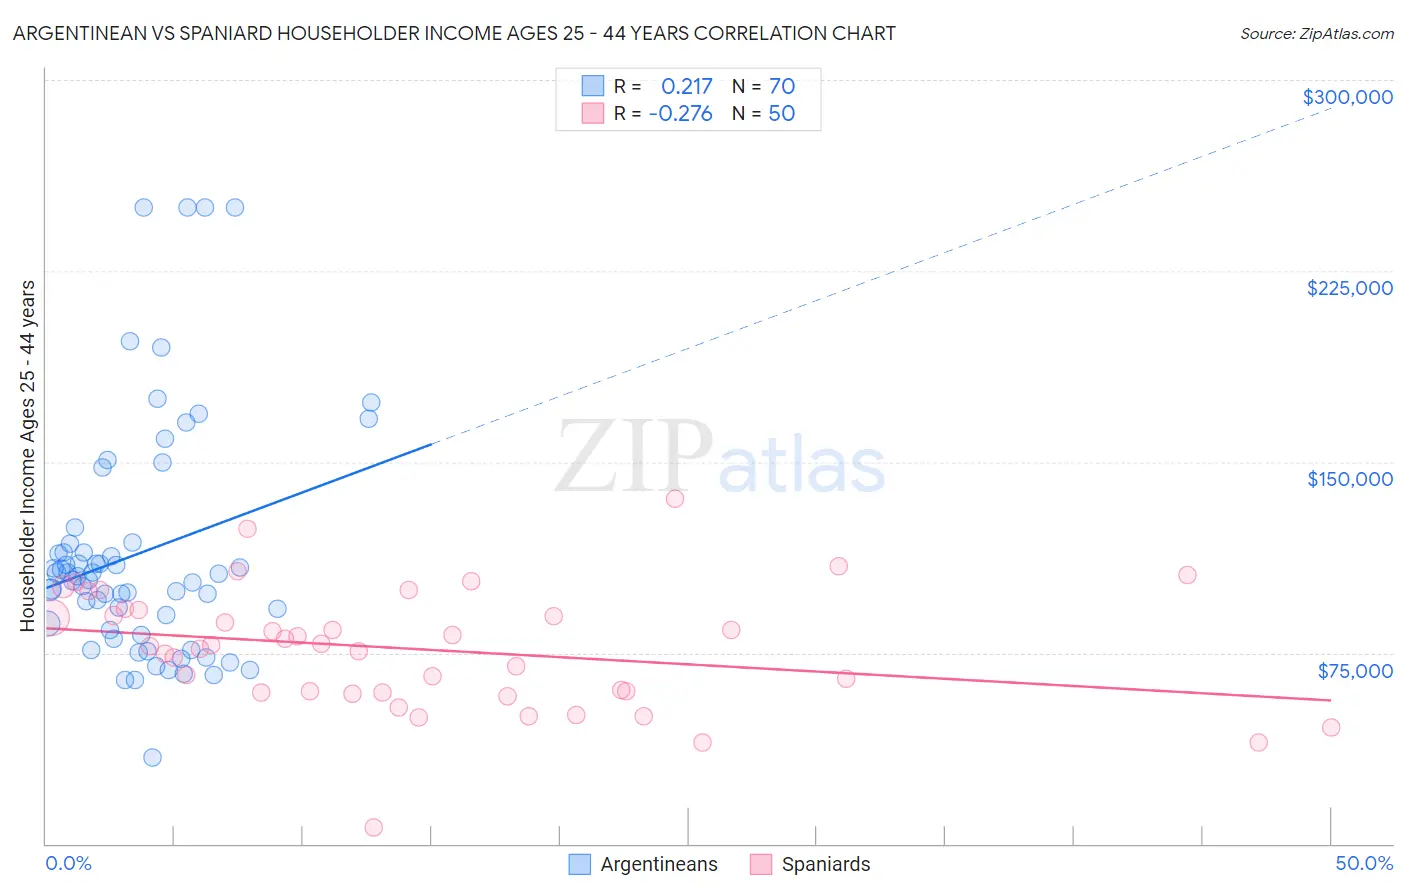 Argentinean vs Spaniard Householder Income Ages 25 - 44 years